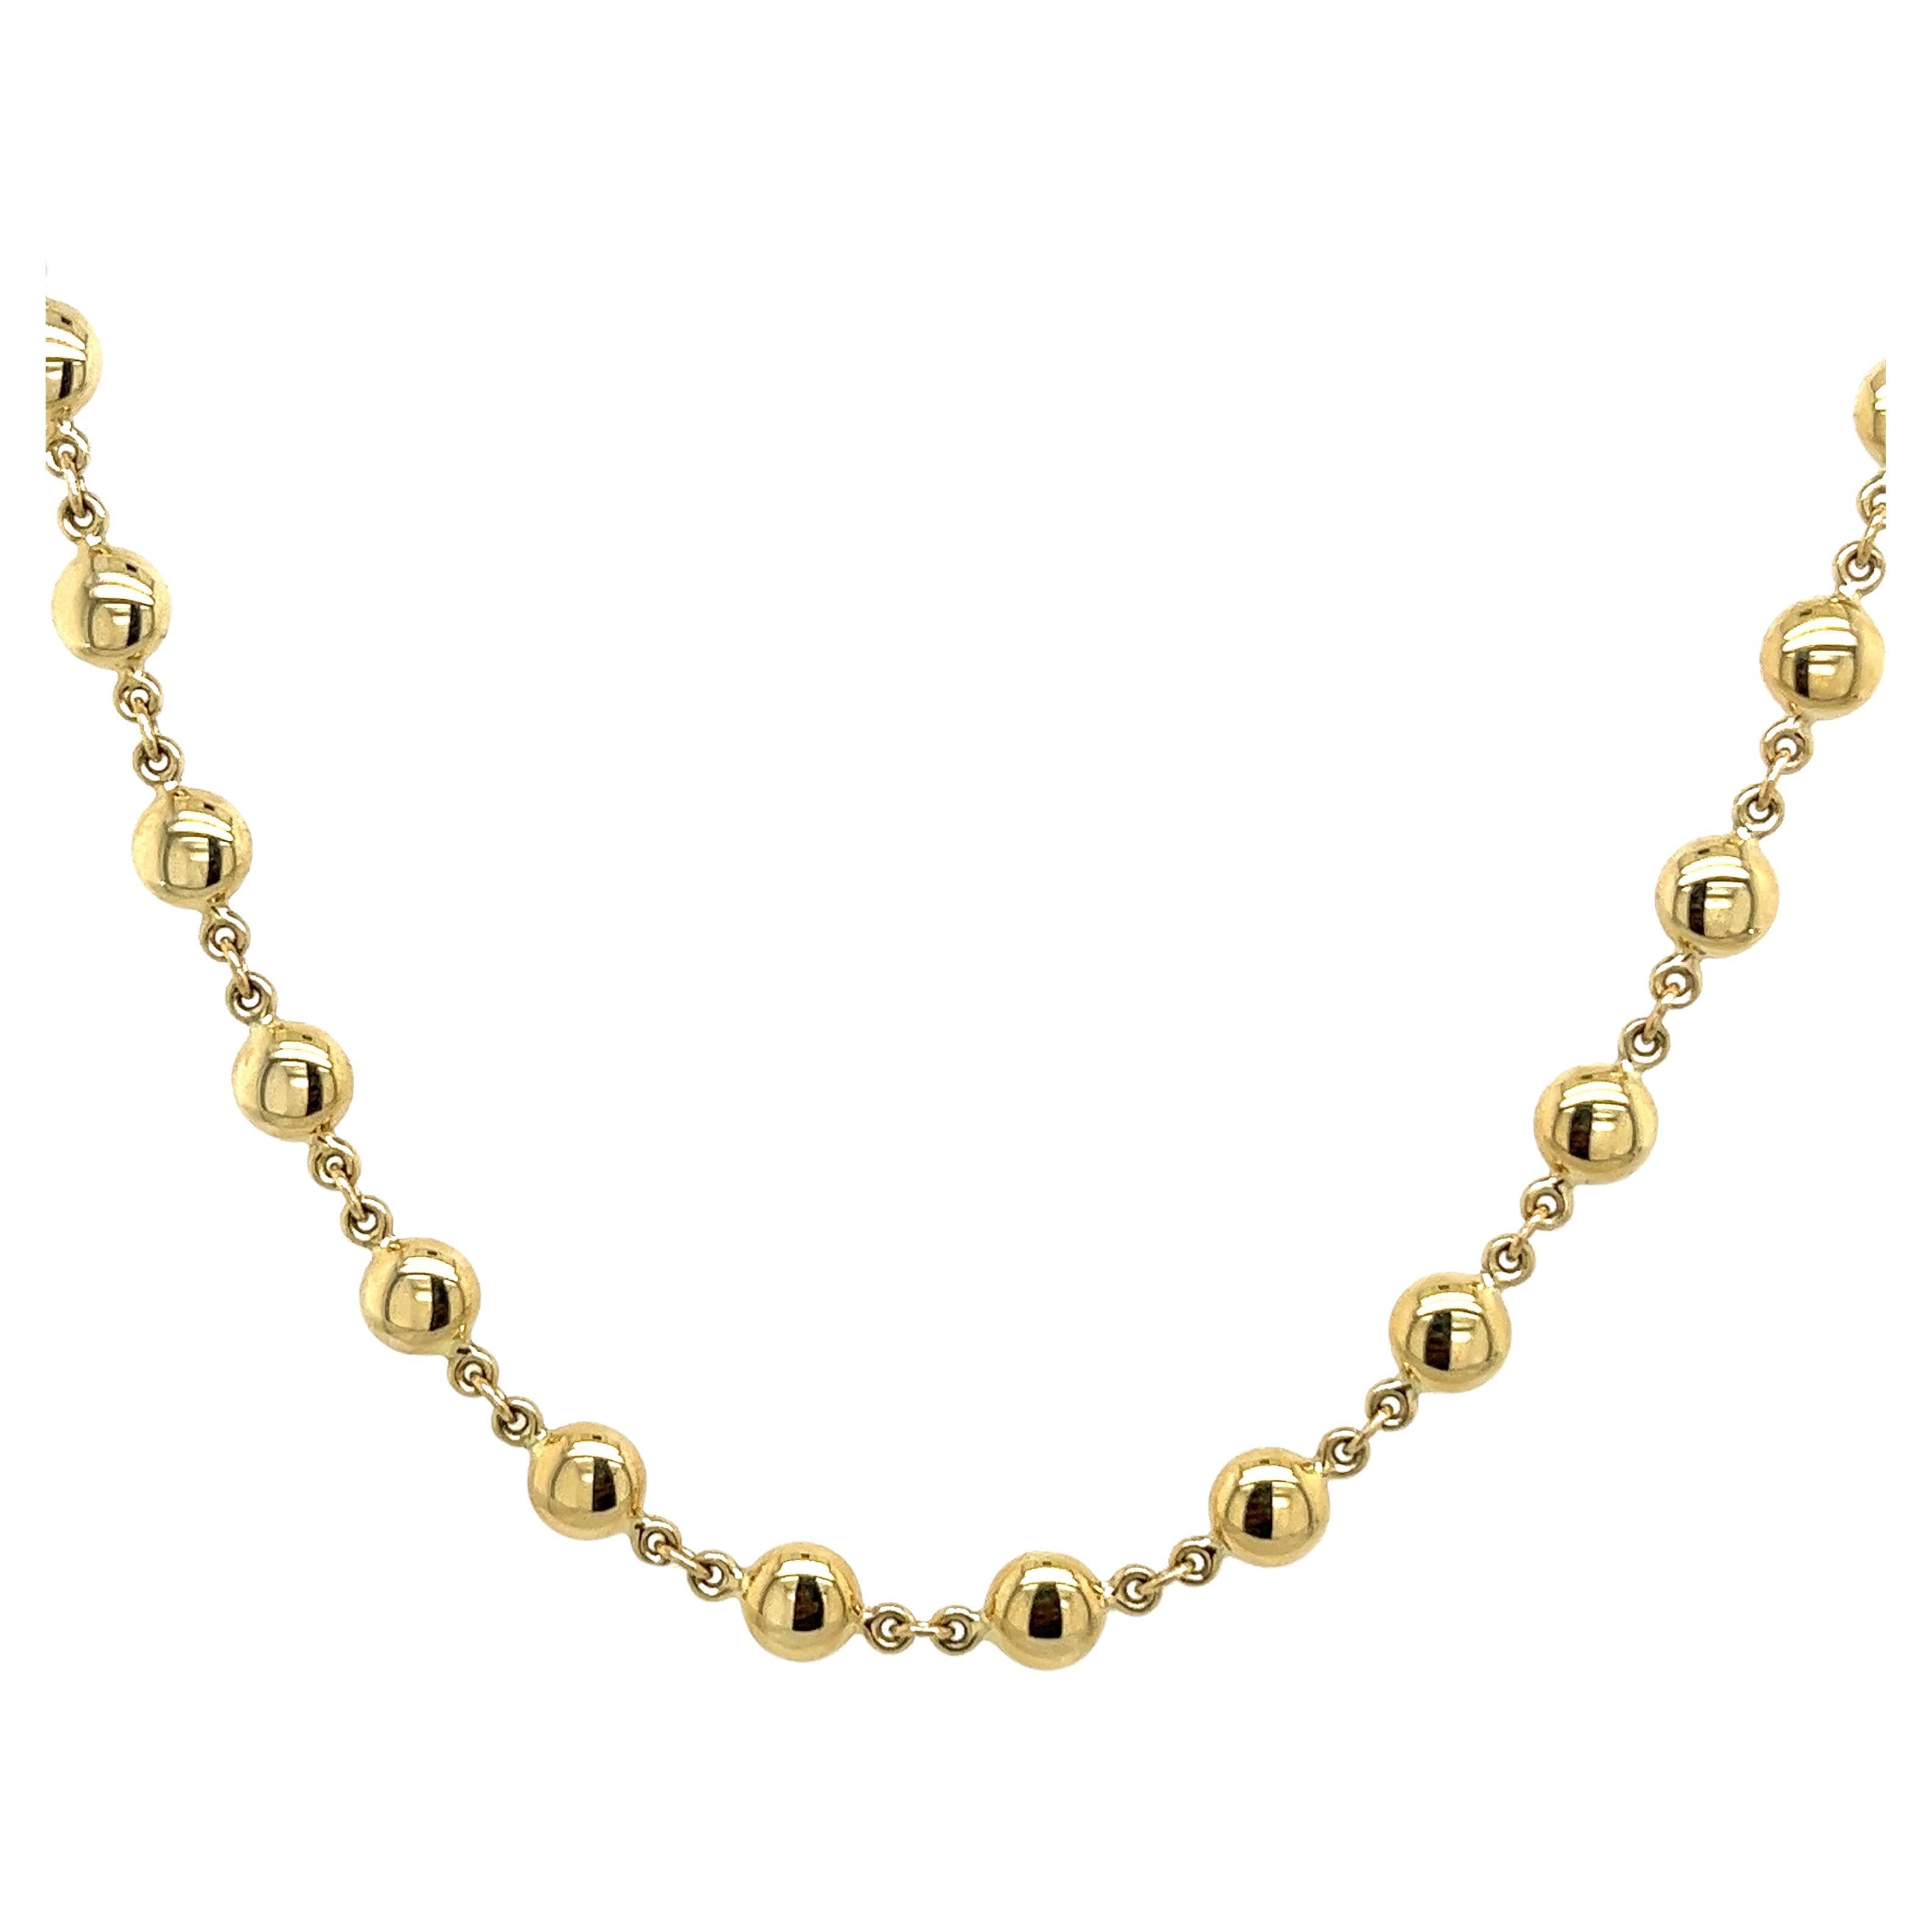 Solid 14ct Yellow Gold Italian Ball Bead Chain Classic Necklace 18" inches